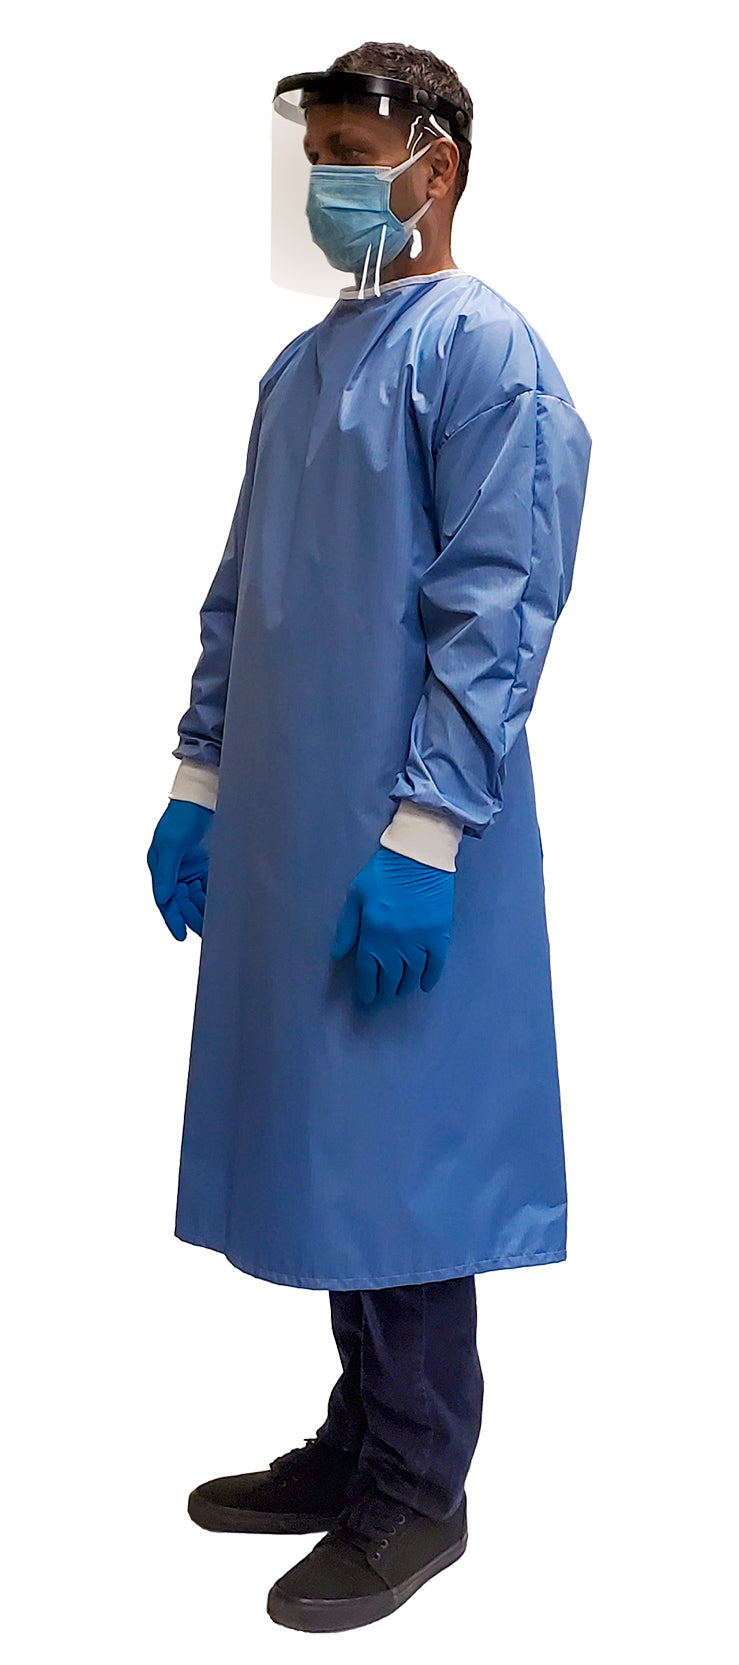 Man wearing a Fast Reusable Isolation Gown4000 Level 2 made with anti-static blue polyester material. Canadian Made. Profile view.